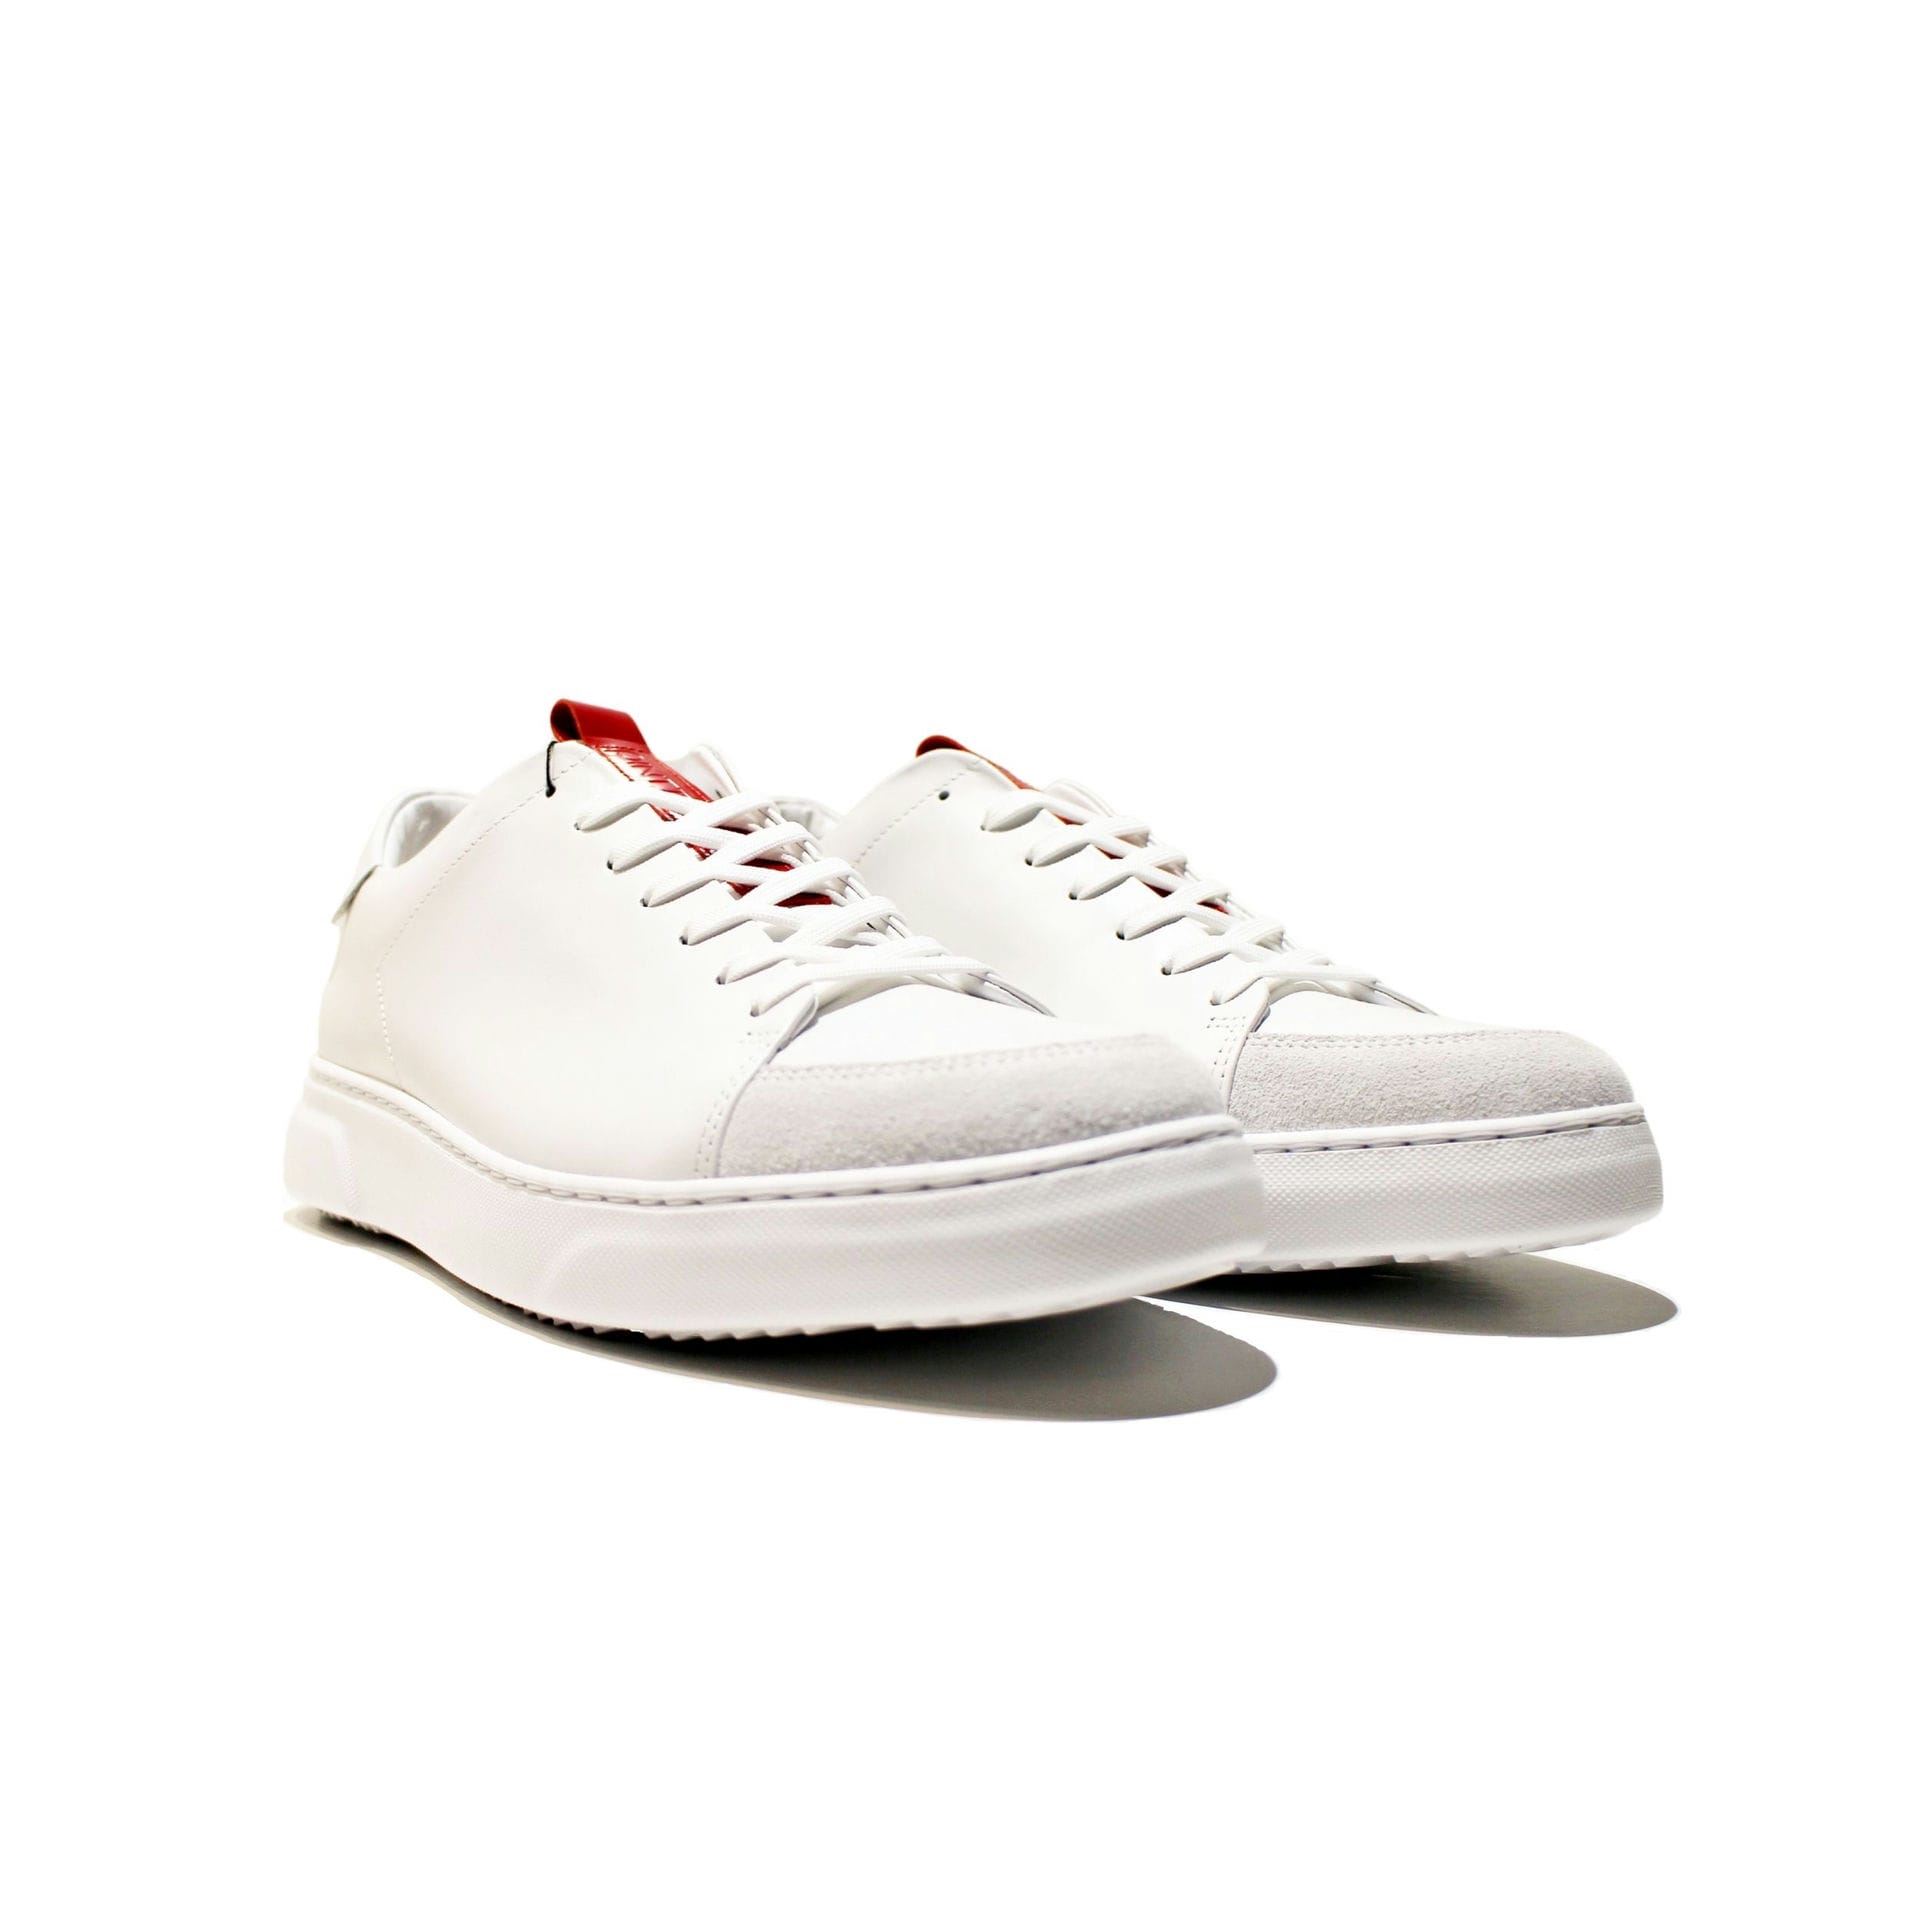 Paris White is a man -made man model with a unique and simple design, all built on high quality, EVA sole. Handmade in Portugal